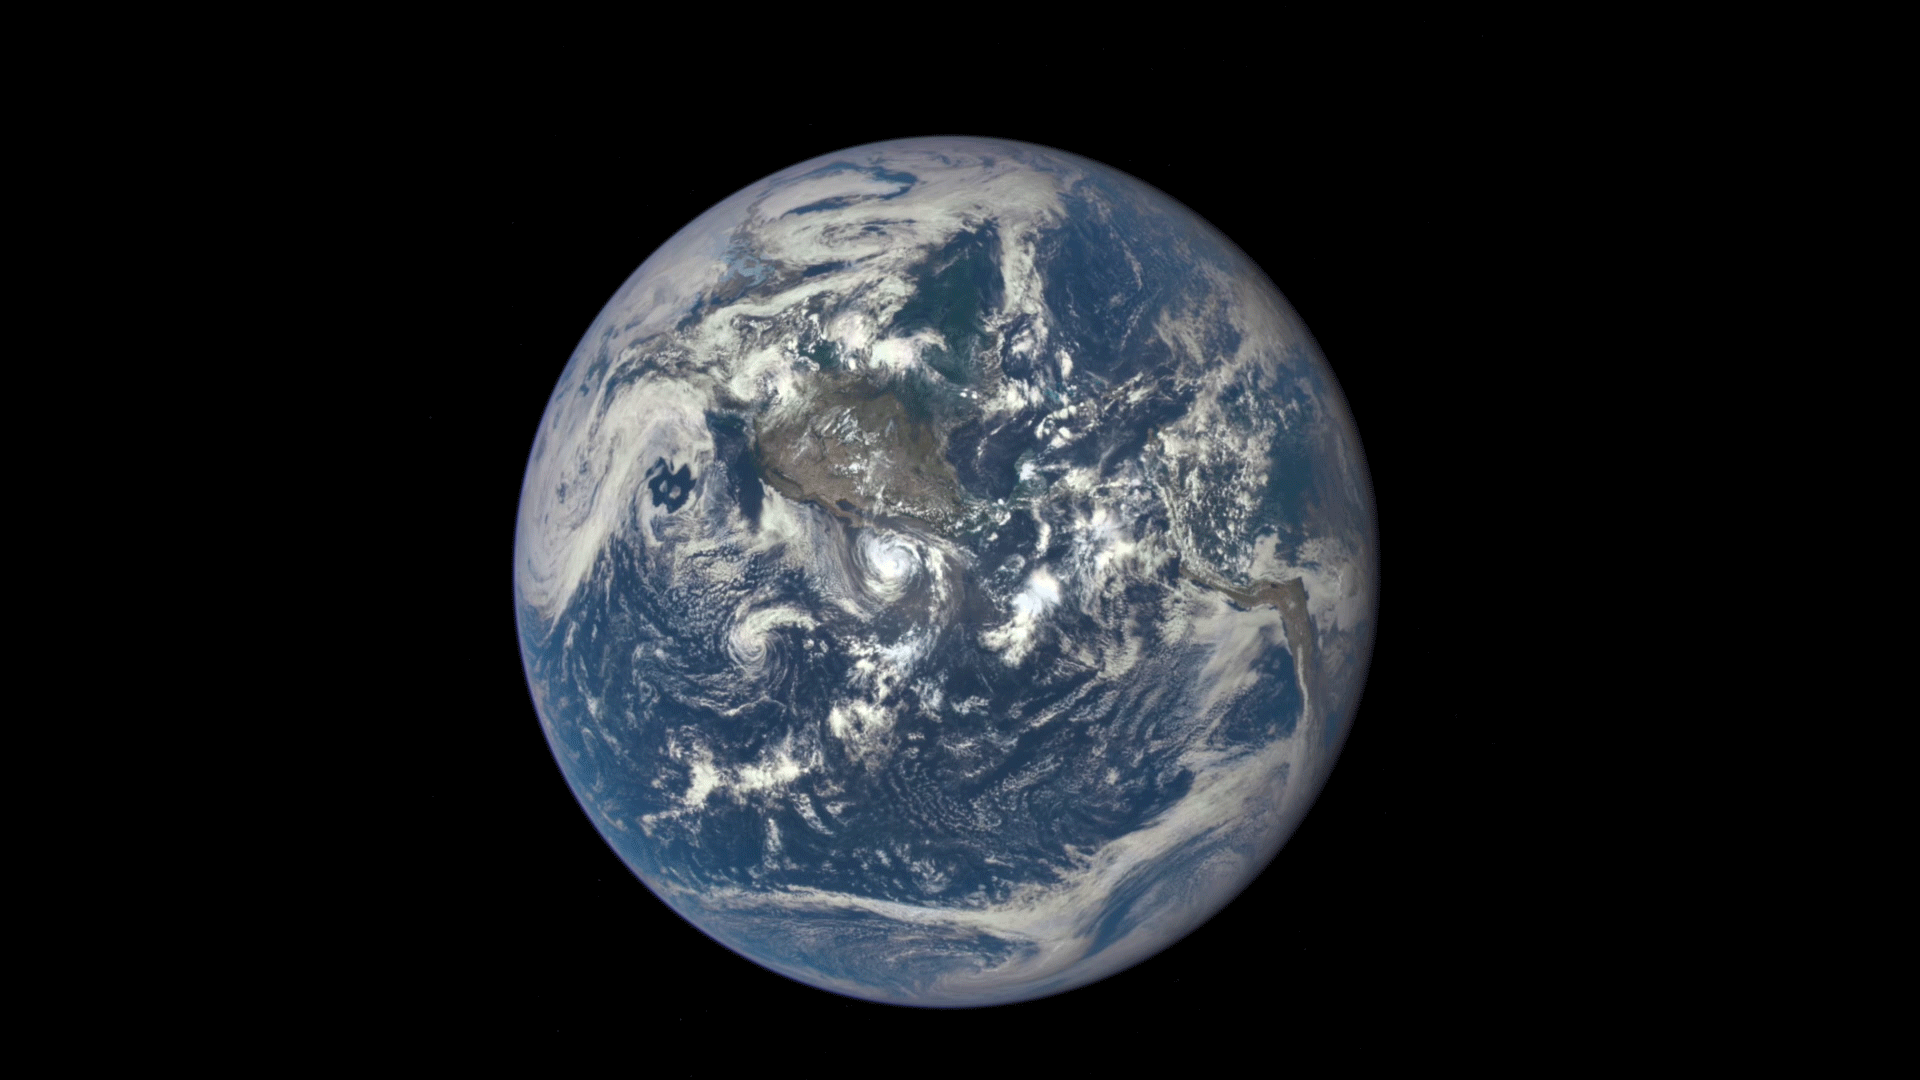 NASA's iconic 'Pale Blue Dot' photograph turns 30 on Friday. It shows Earth  in the void of space from nearly 4 billion miles away.